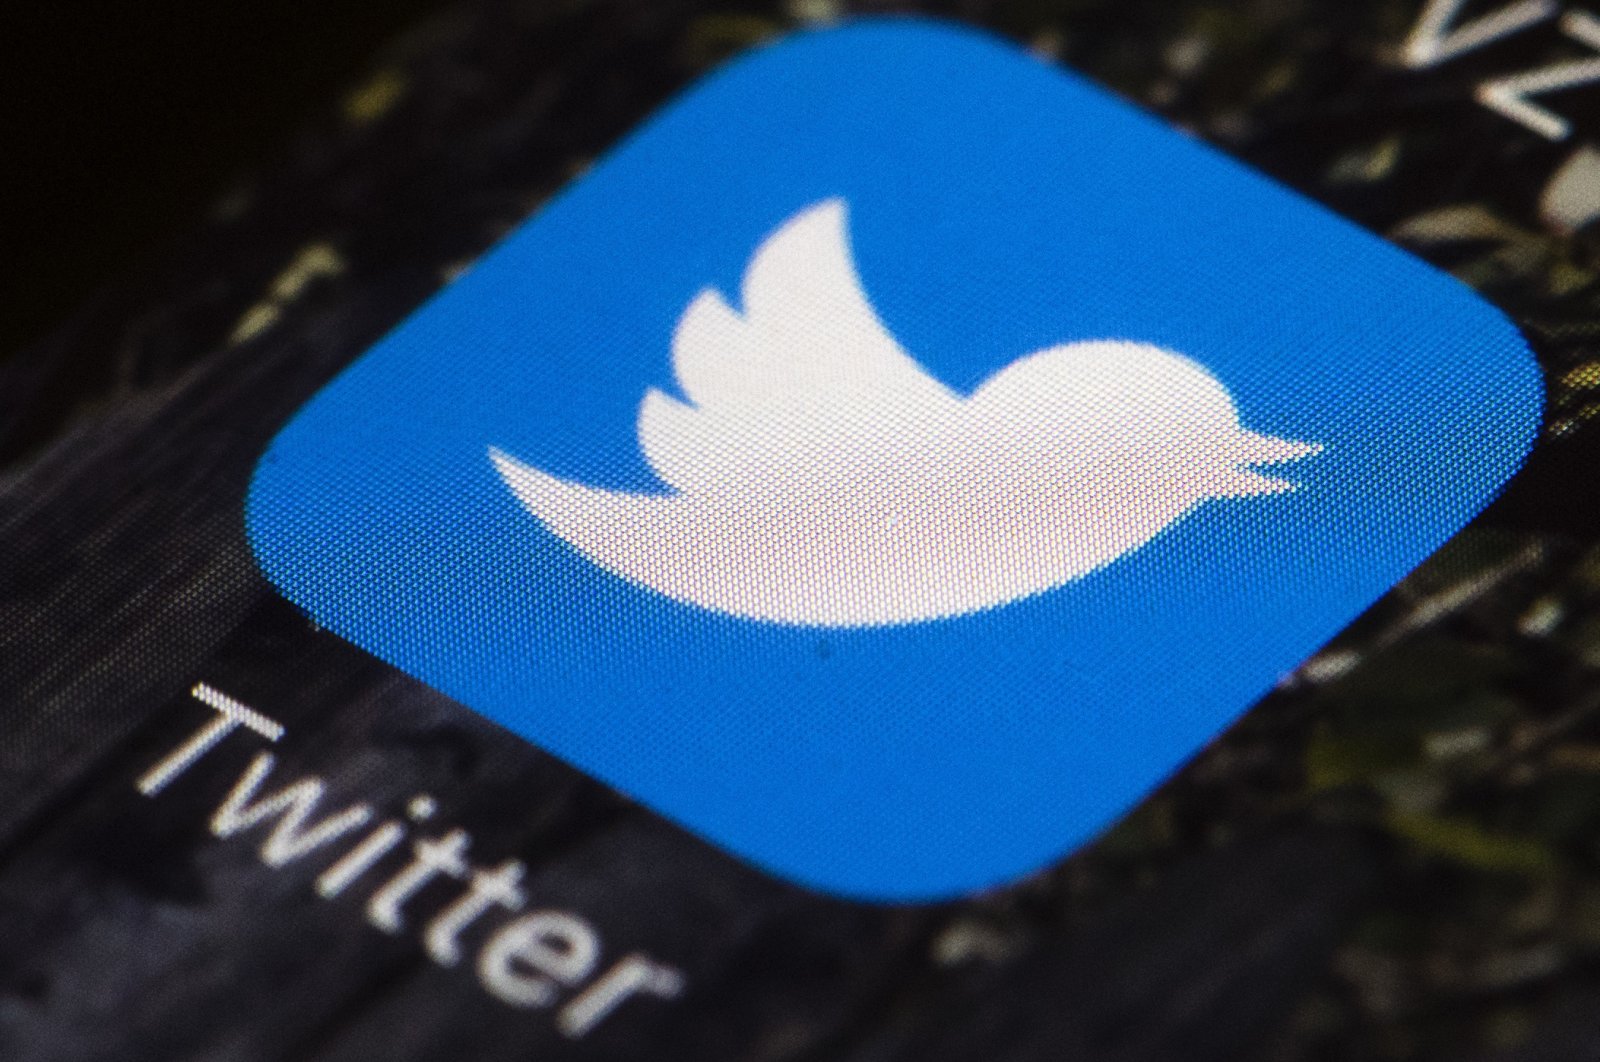 This file photo shows the Twitter app icon on a mobile phone. (AP Photo)